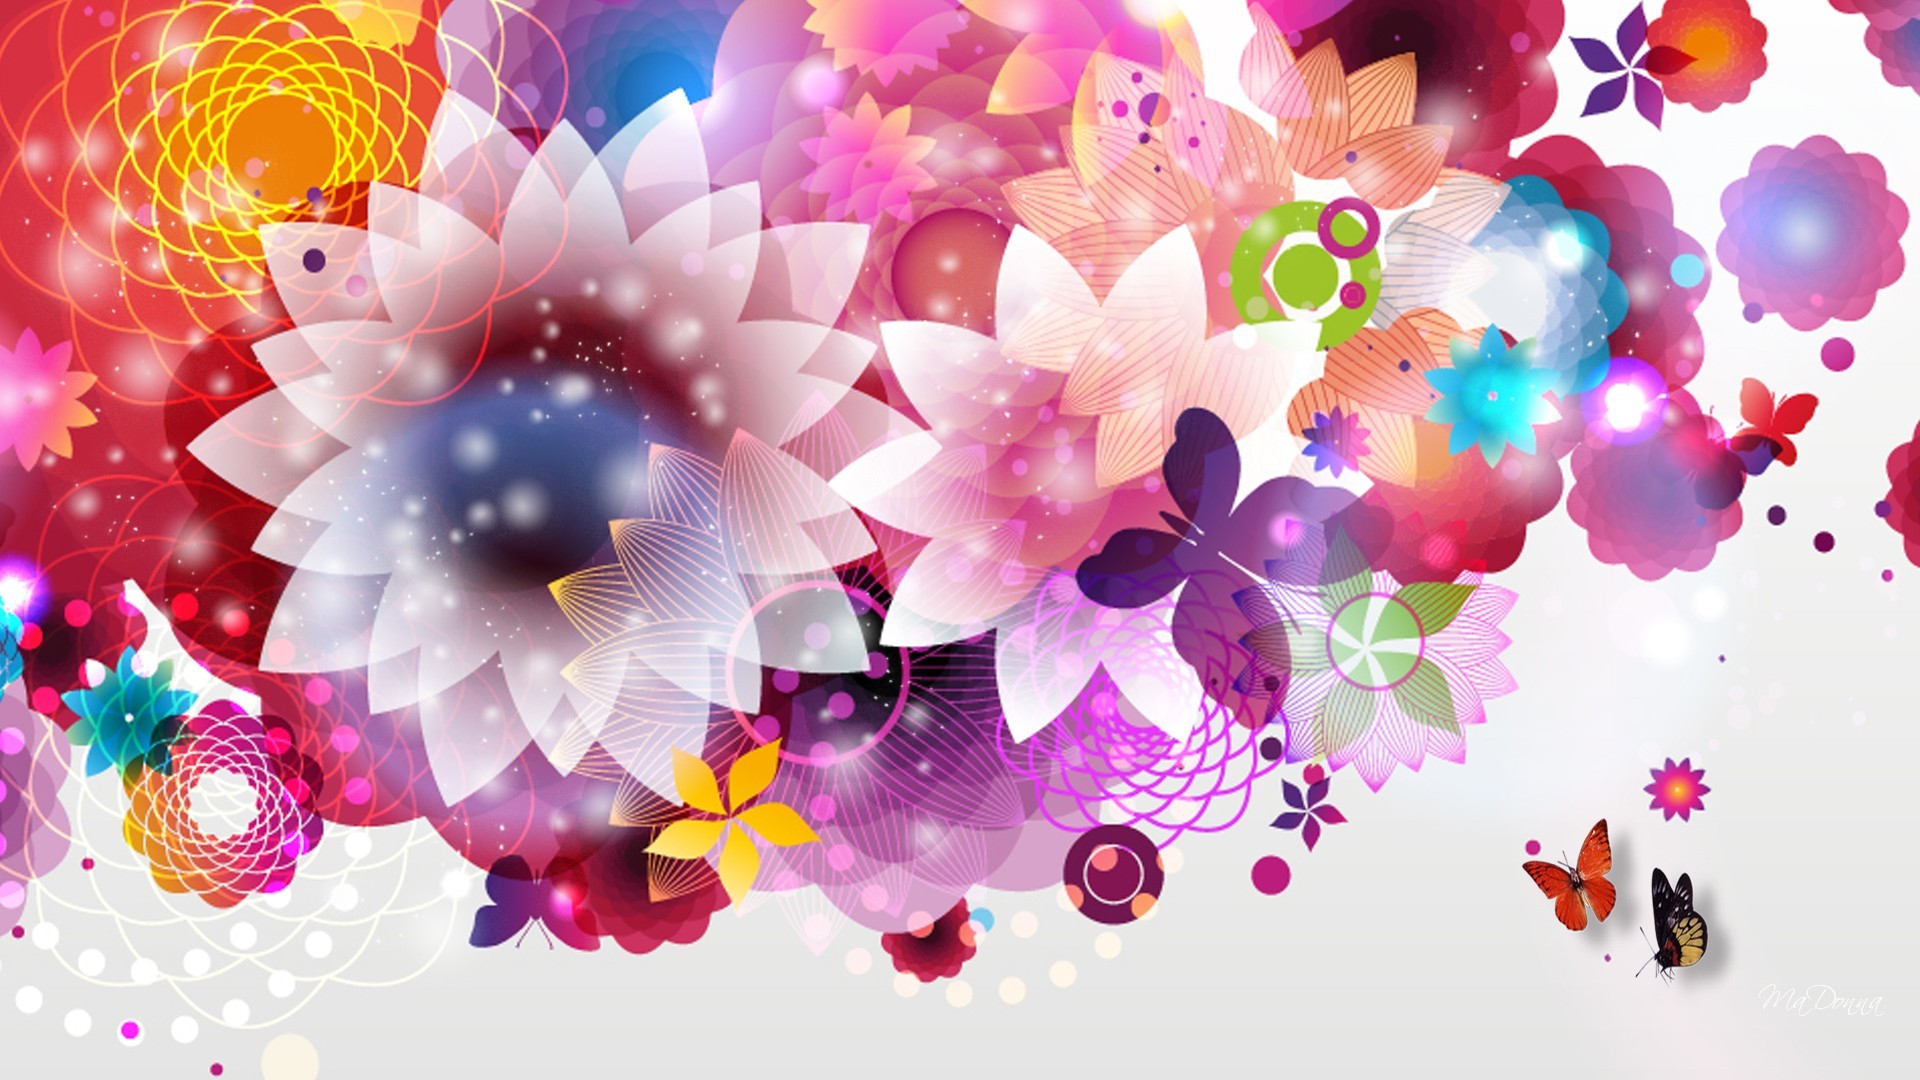 1920x1080 abstract floral online wallpapers 2048Ã1152. Desktop Bright Floral